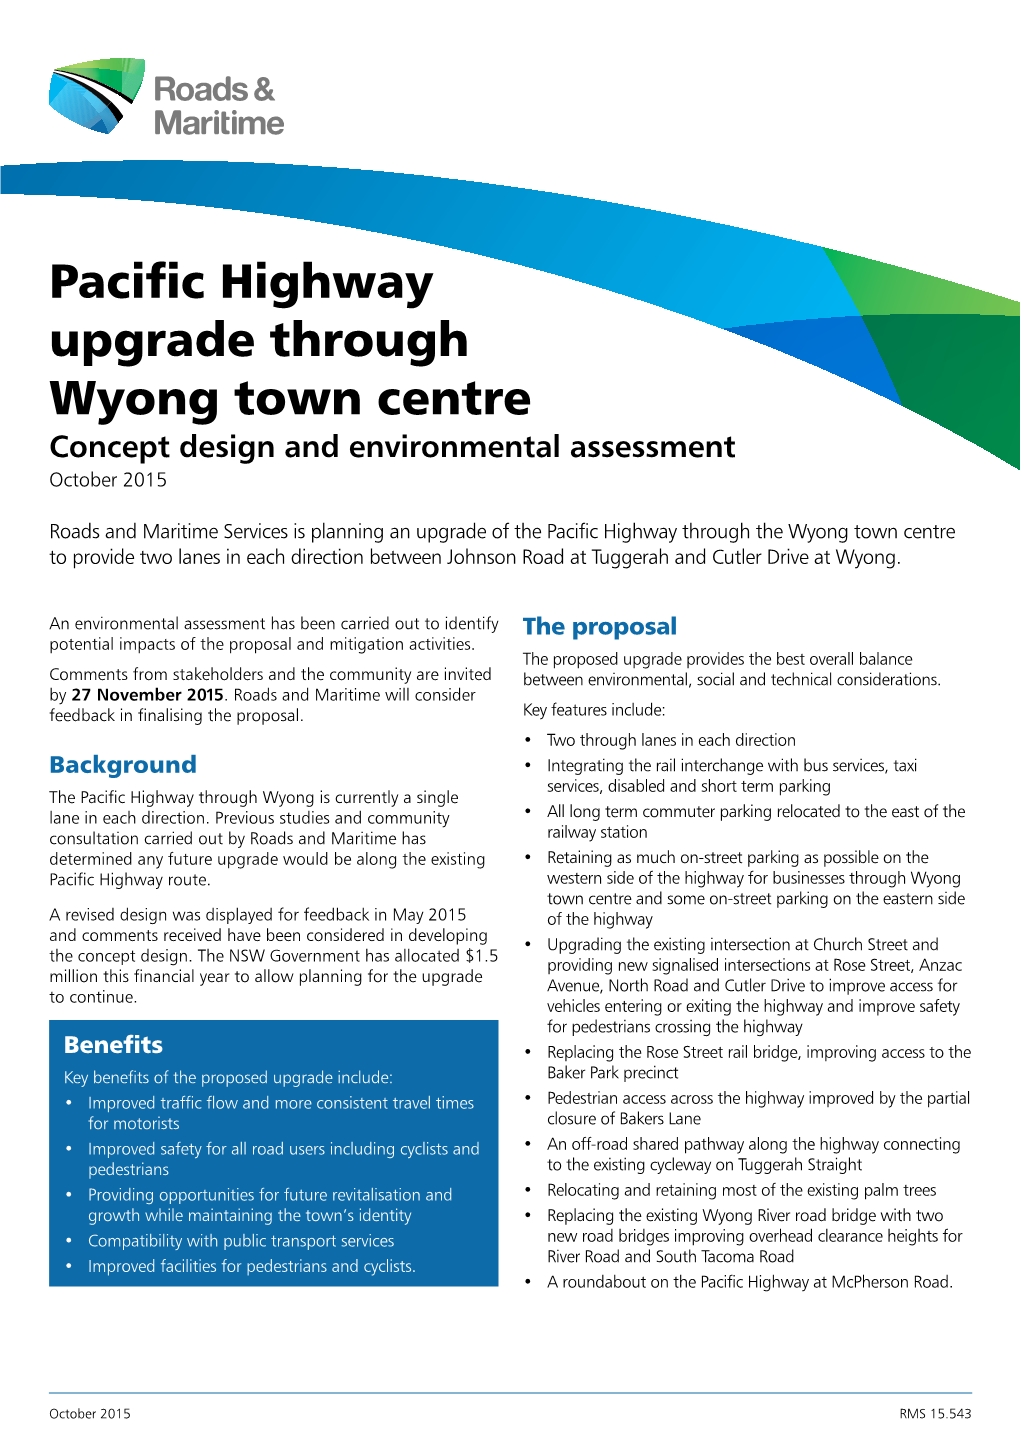 Pacific Highway Upgrade Through Wyong Town Centre Concept Design and Environmental Assessment October 2015